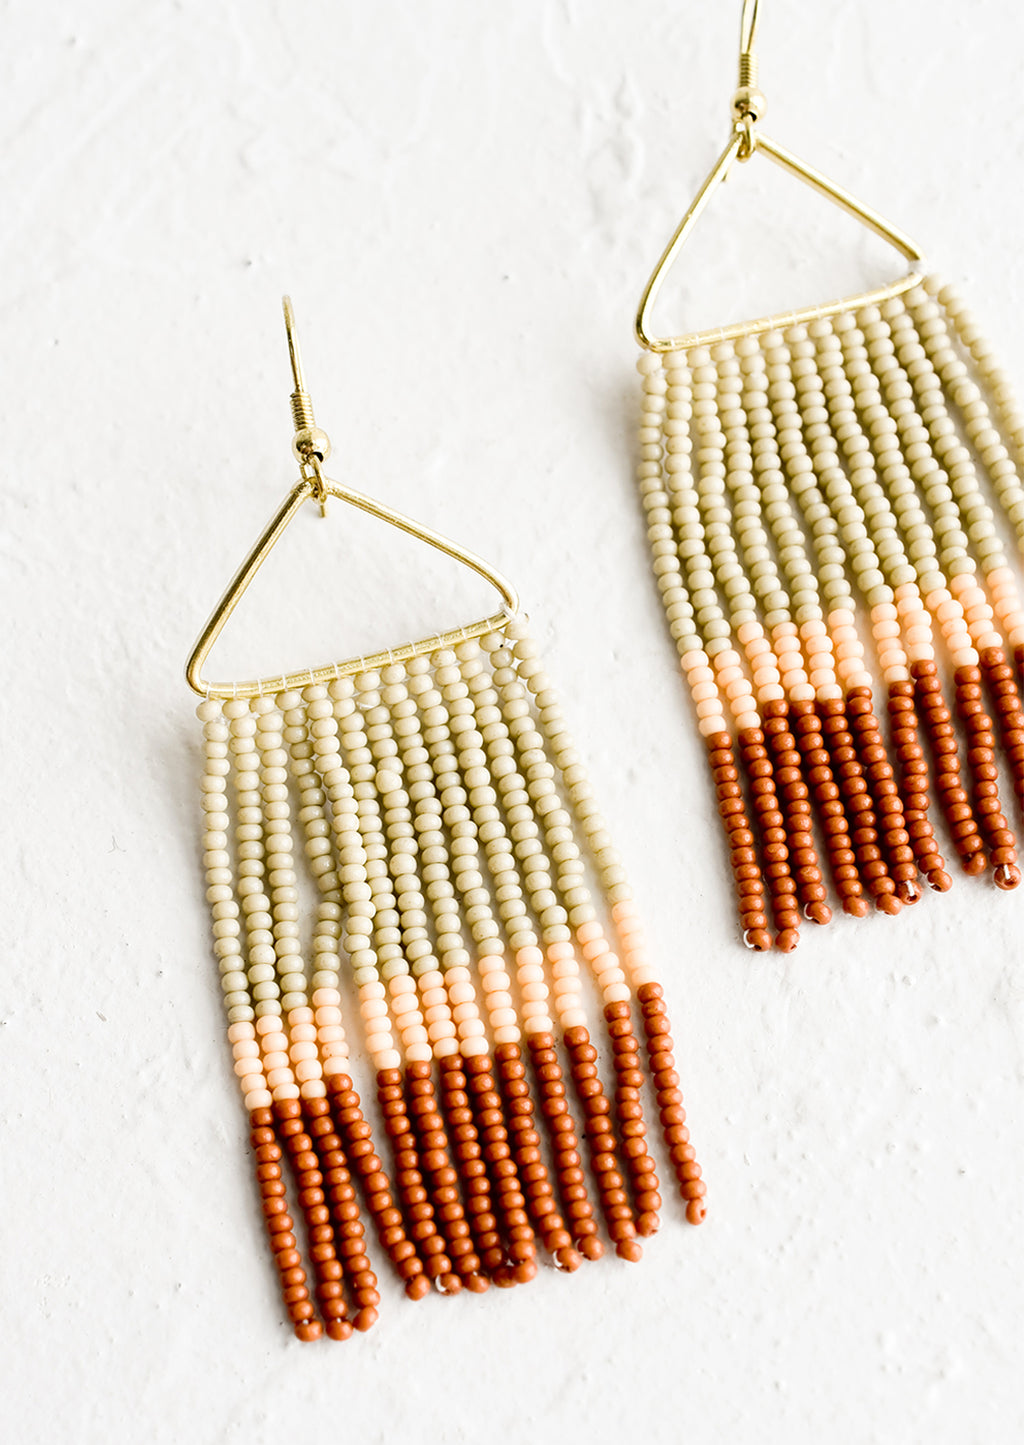 Peach / Rust Multi: Beaded earrings with triangular metal frame and fringed beads below in colorblock pattern.